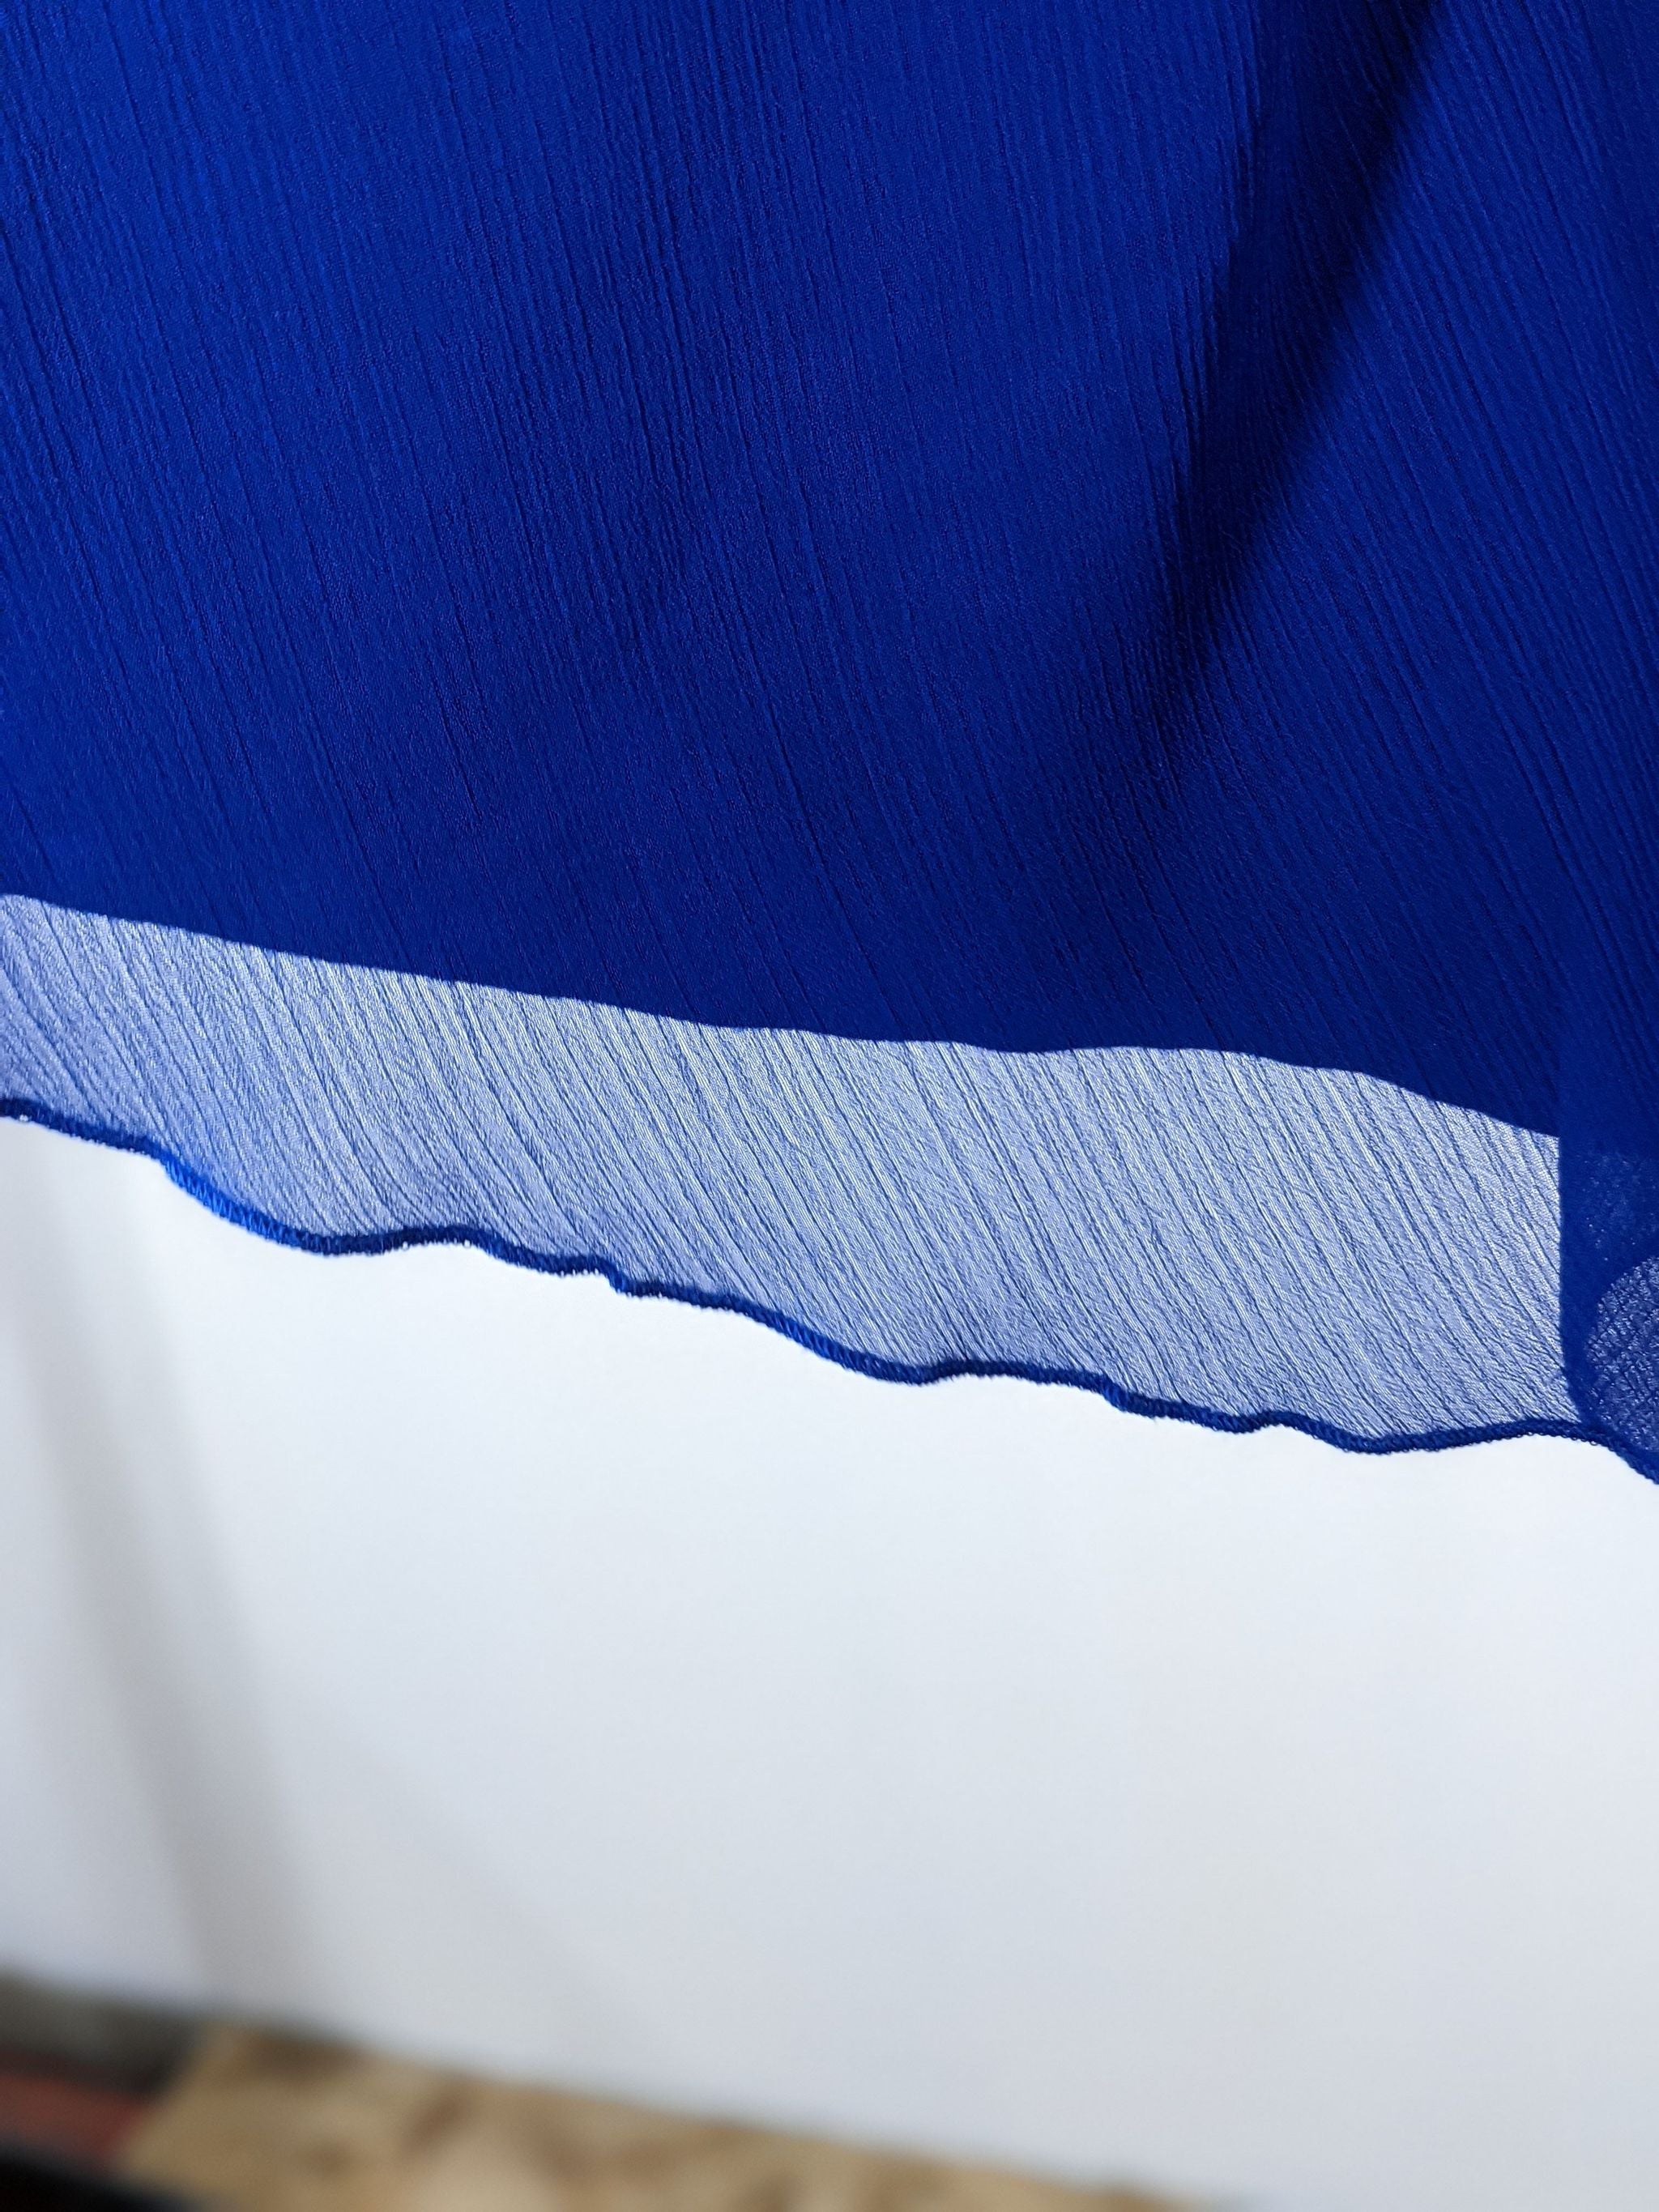 Close-up of a Chico's women's garment with blue and white color blocks and a jagged edge detail.